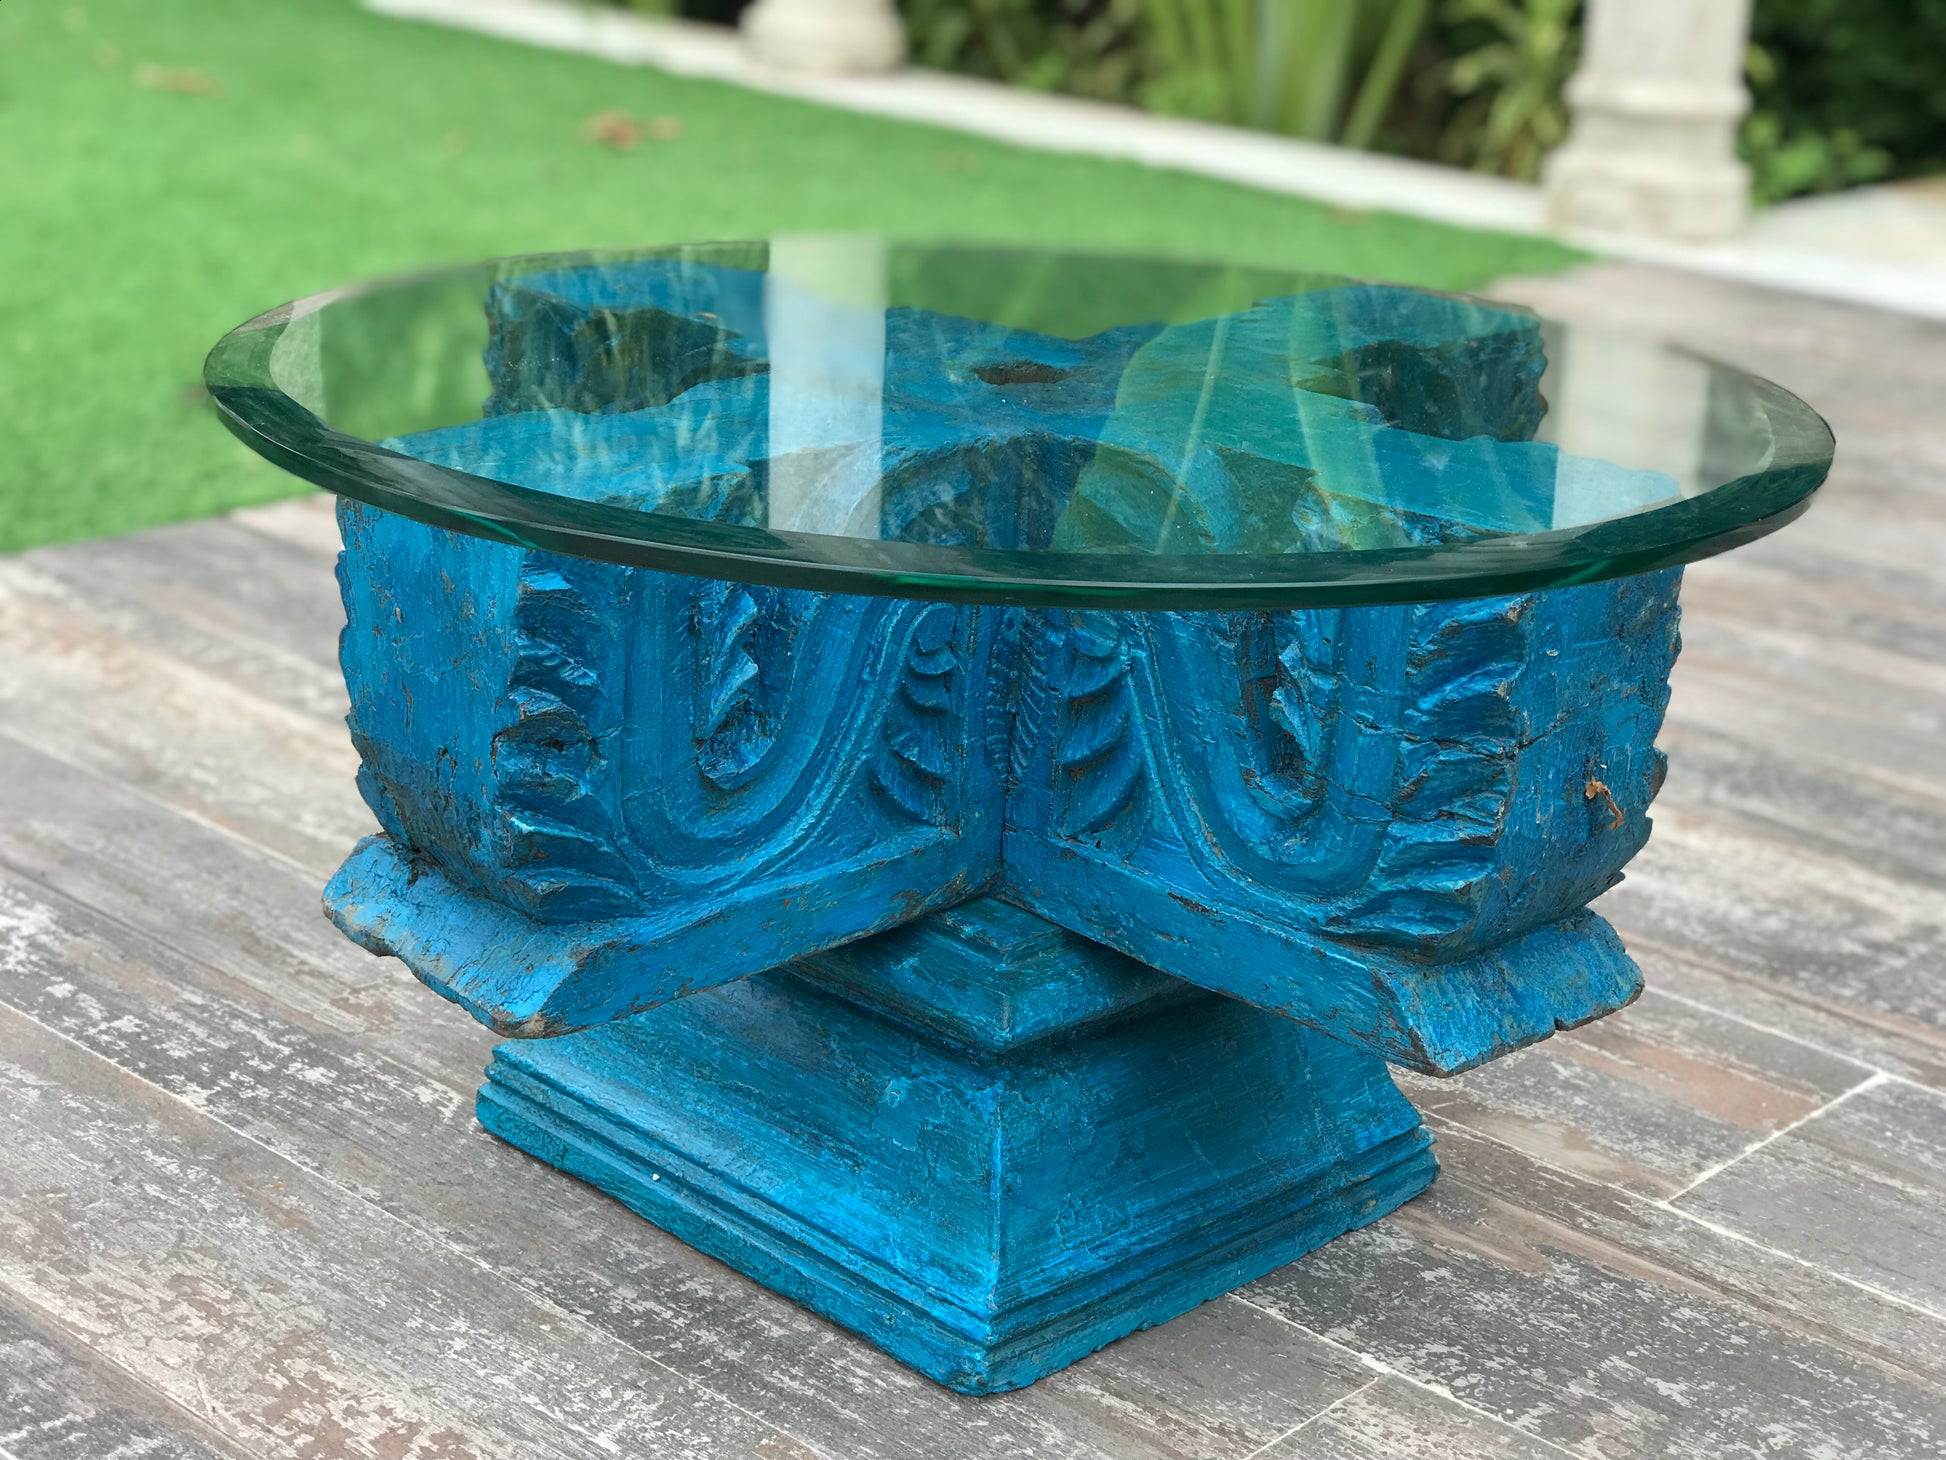 Elegant and Traditional Wooden Carved Blue Bracket Coffee Table.  The Source India is an Indian Handicraft, Home Decor, Furnishing and Textiles Store. Based out of Hauz Khas Village New Delhi, each piece is carefully procured to allow the enhancement of India's Culture.